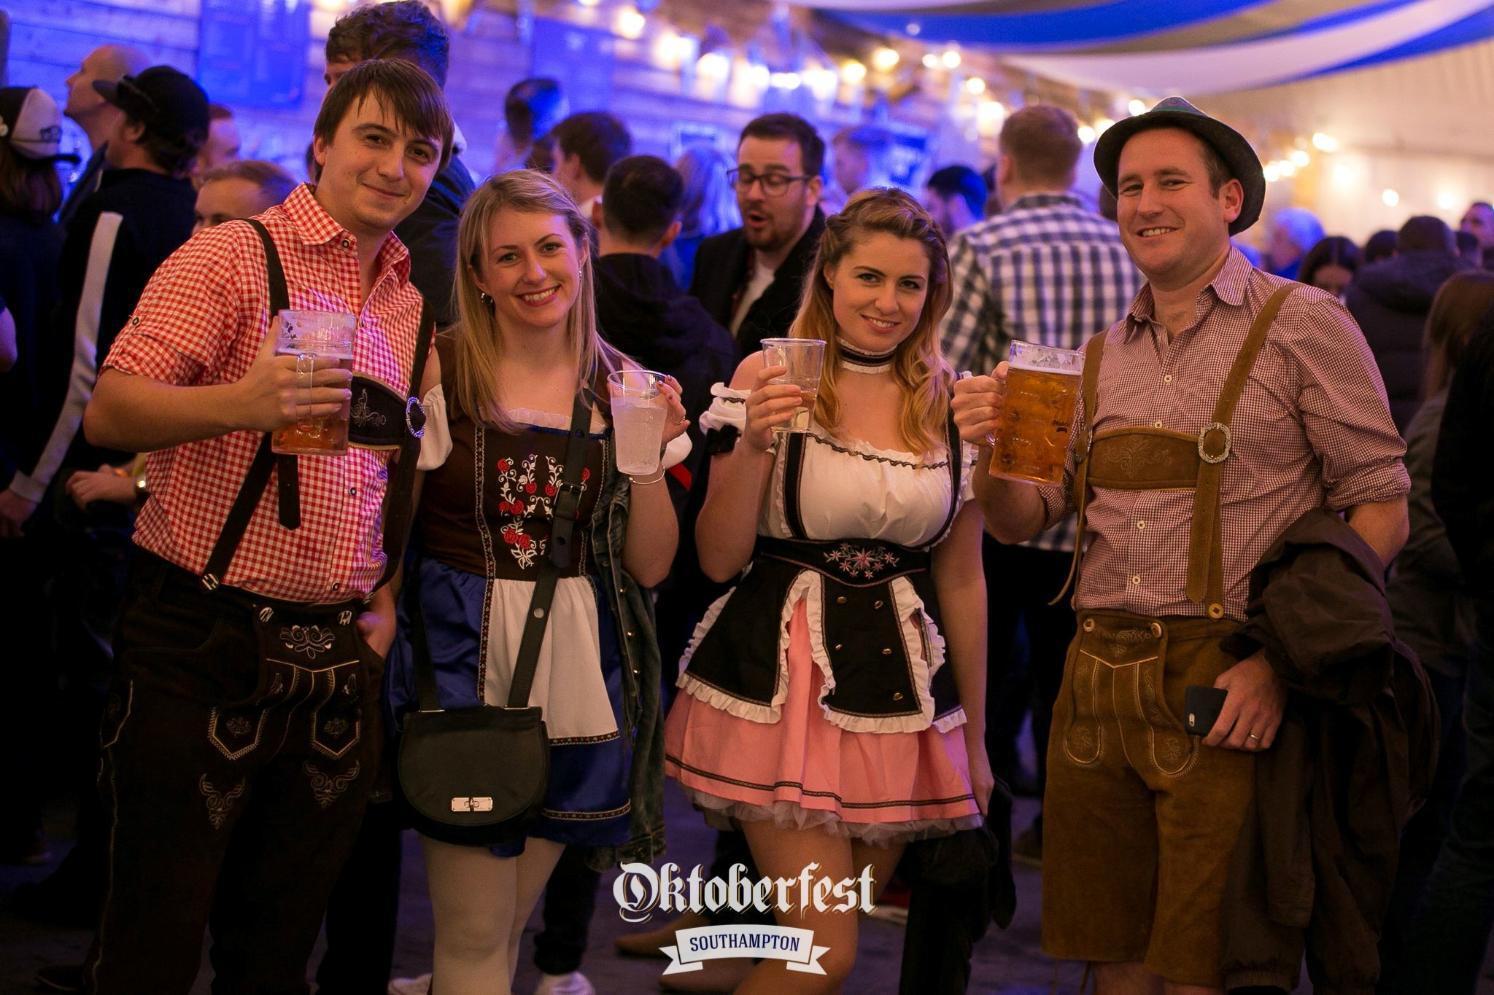 Four people standing and smiling with drinks at Oktoberfest